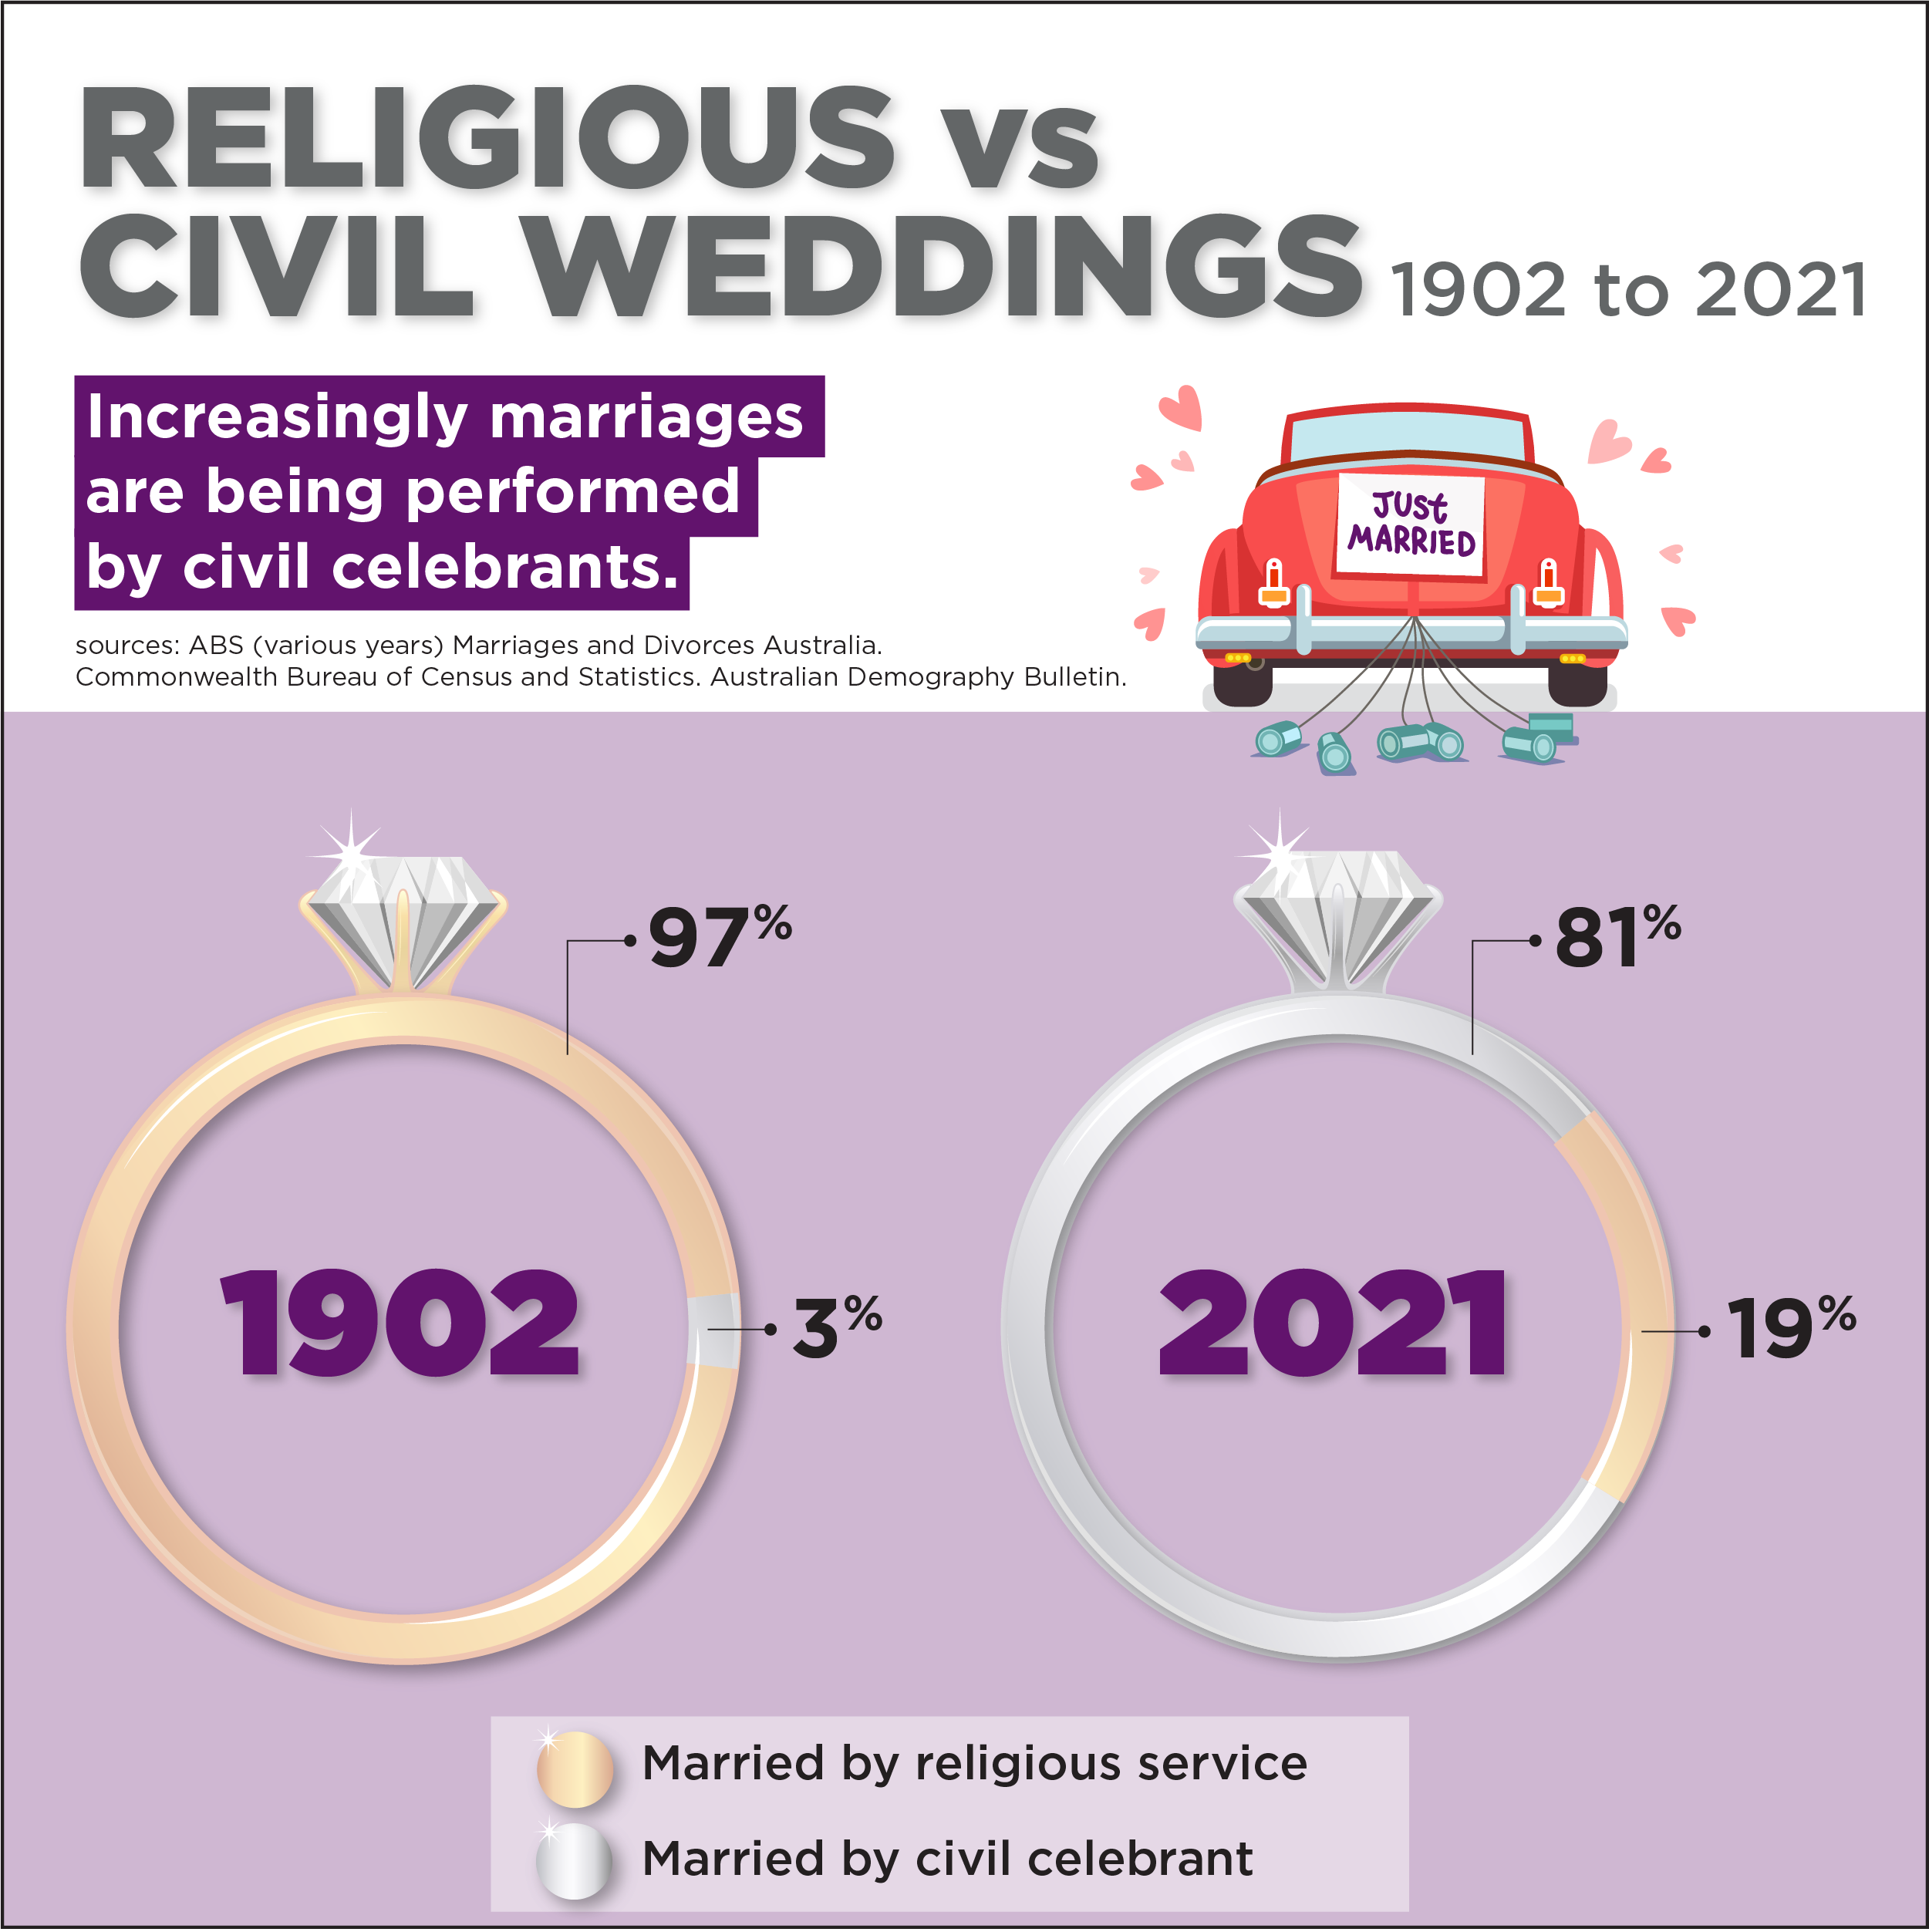 Religious versus civil weddings, 1902 to 2021 - Increasingly marriages are being performed by civil celebrants; In 1902 97% were married by religious service and 3% married by civil celebrant; In 2021 19% were married by religious service and 81% married by civil celebrant.